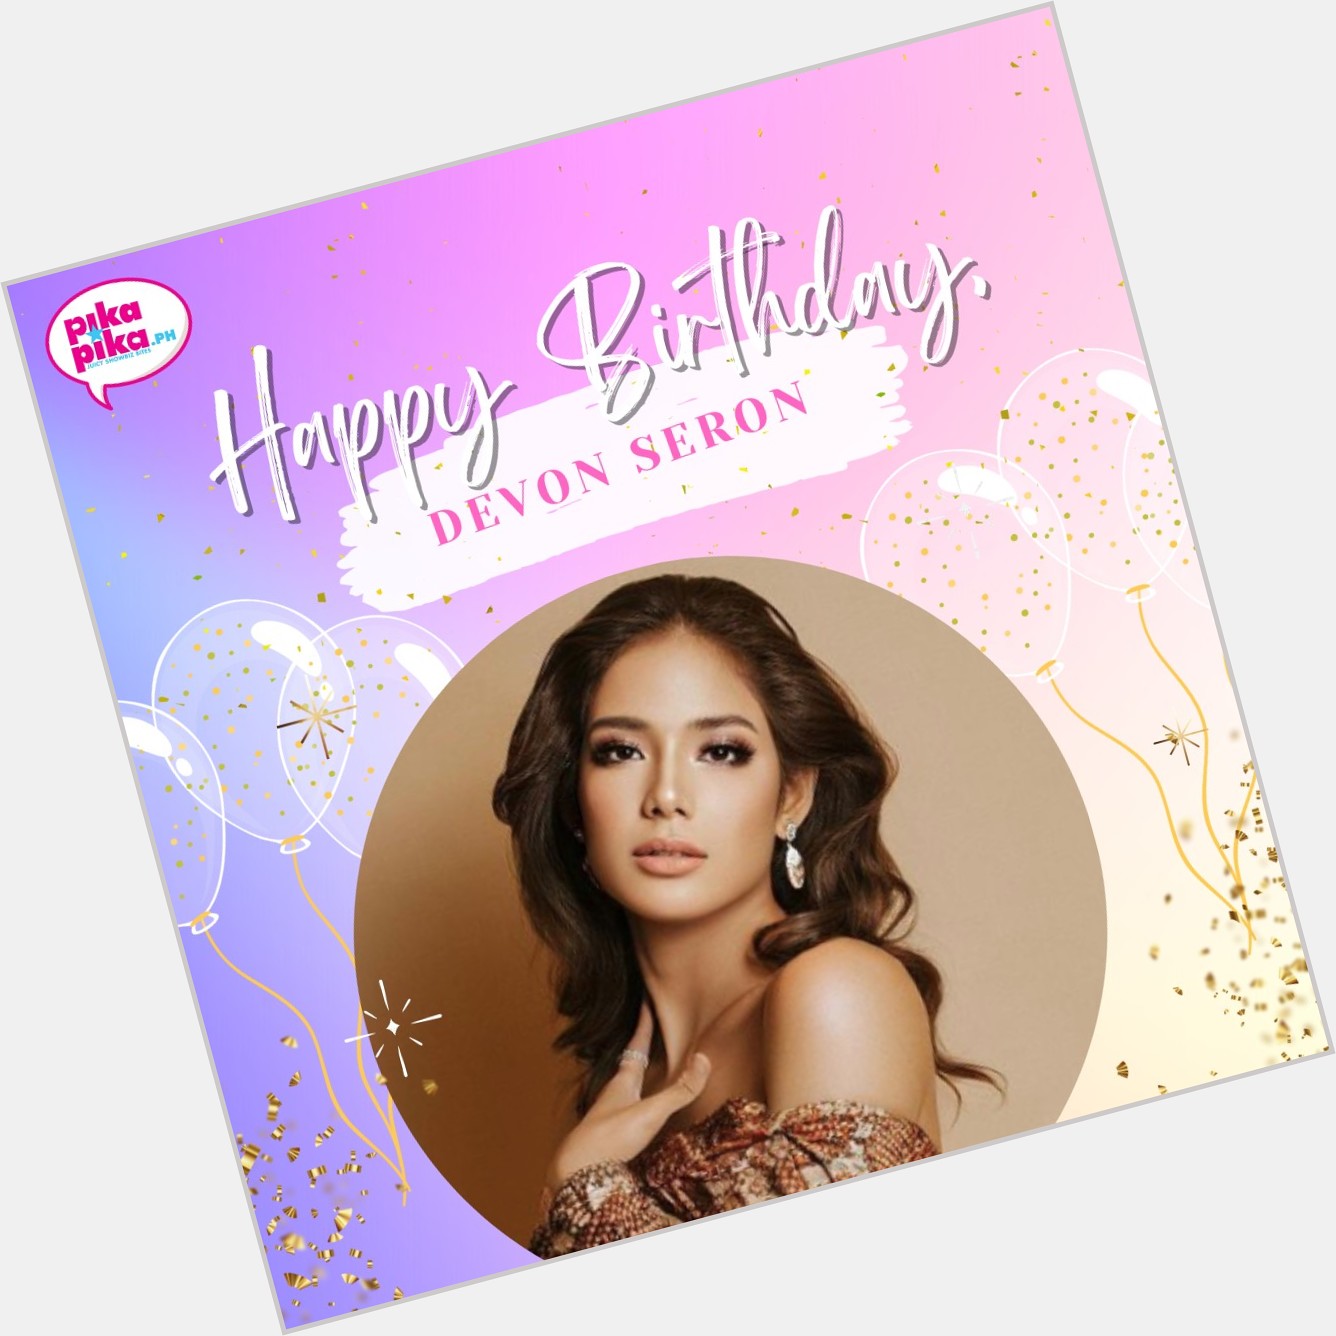 Happy birthday, Devon Seron! May your special day be filled with love and cheers.    